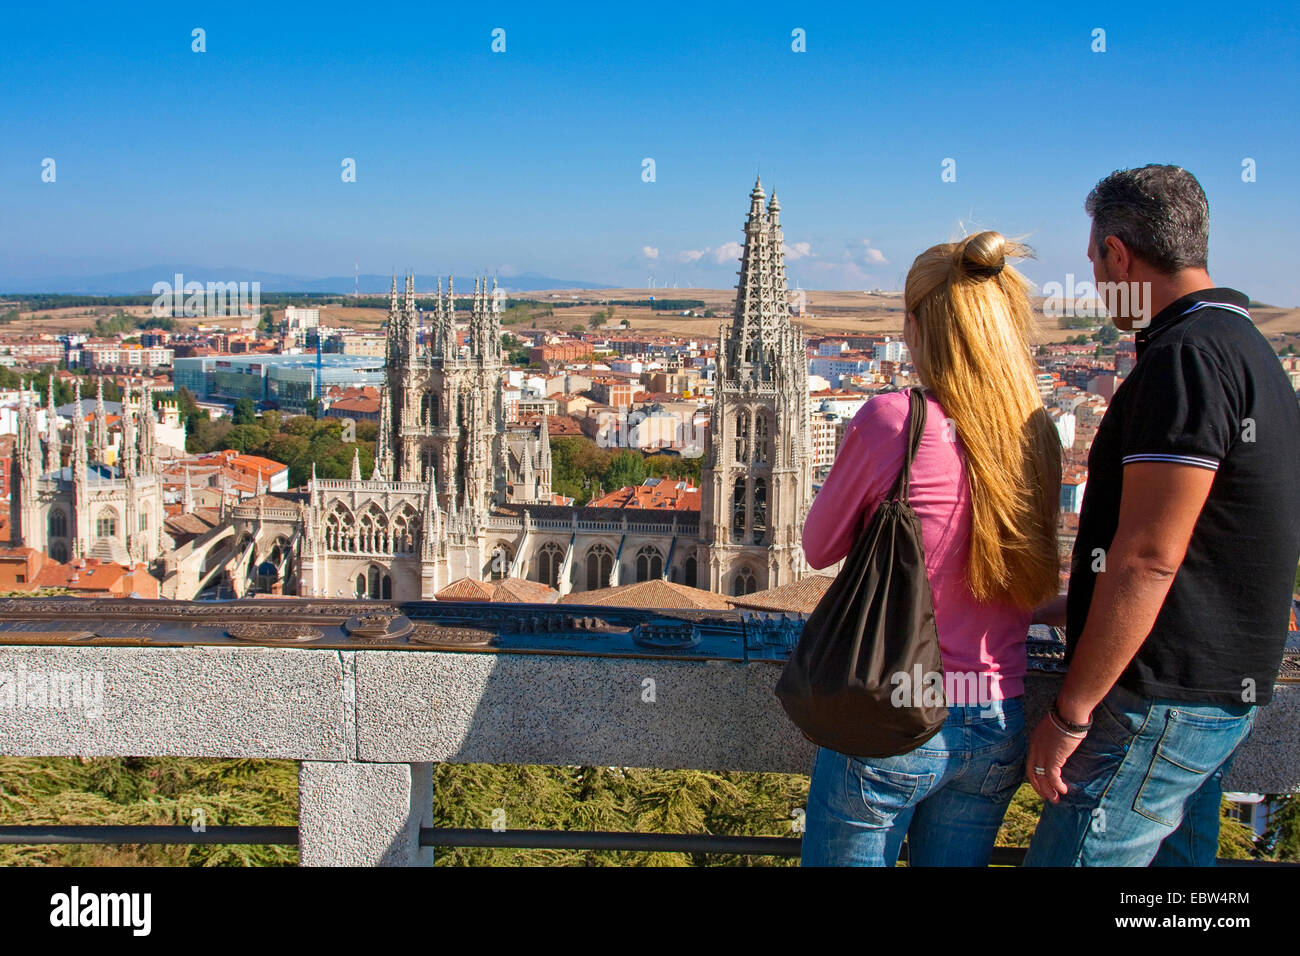 couple at a gazebo looking on the city dominated by the cathedral, Spain, Kastilien und Le¾n, Burgos Stock Photo